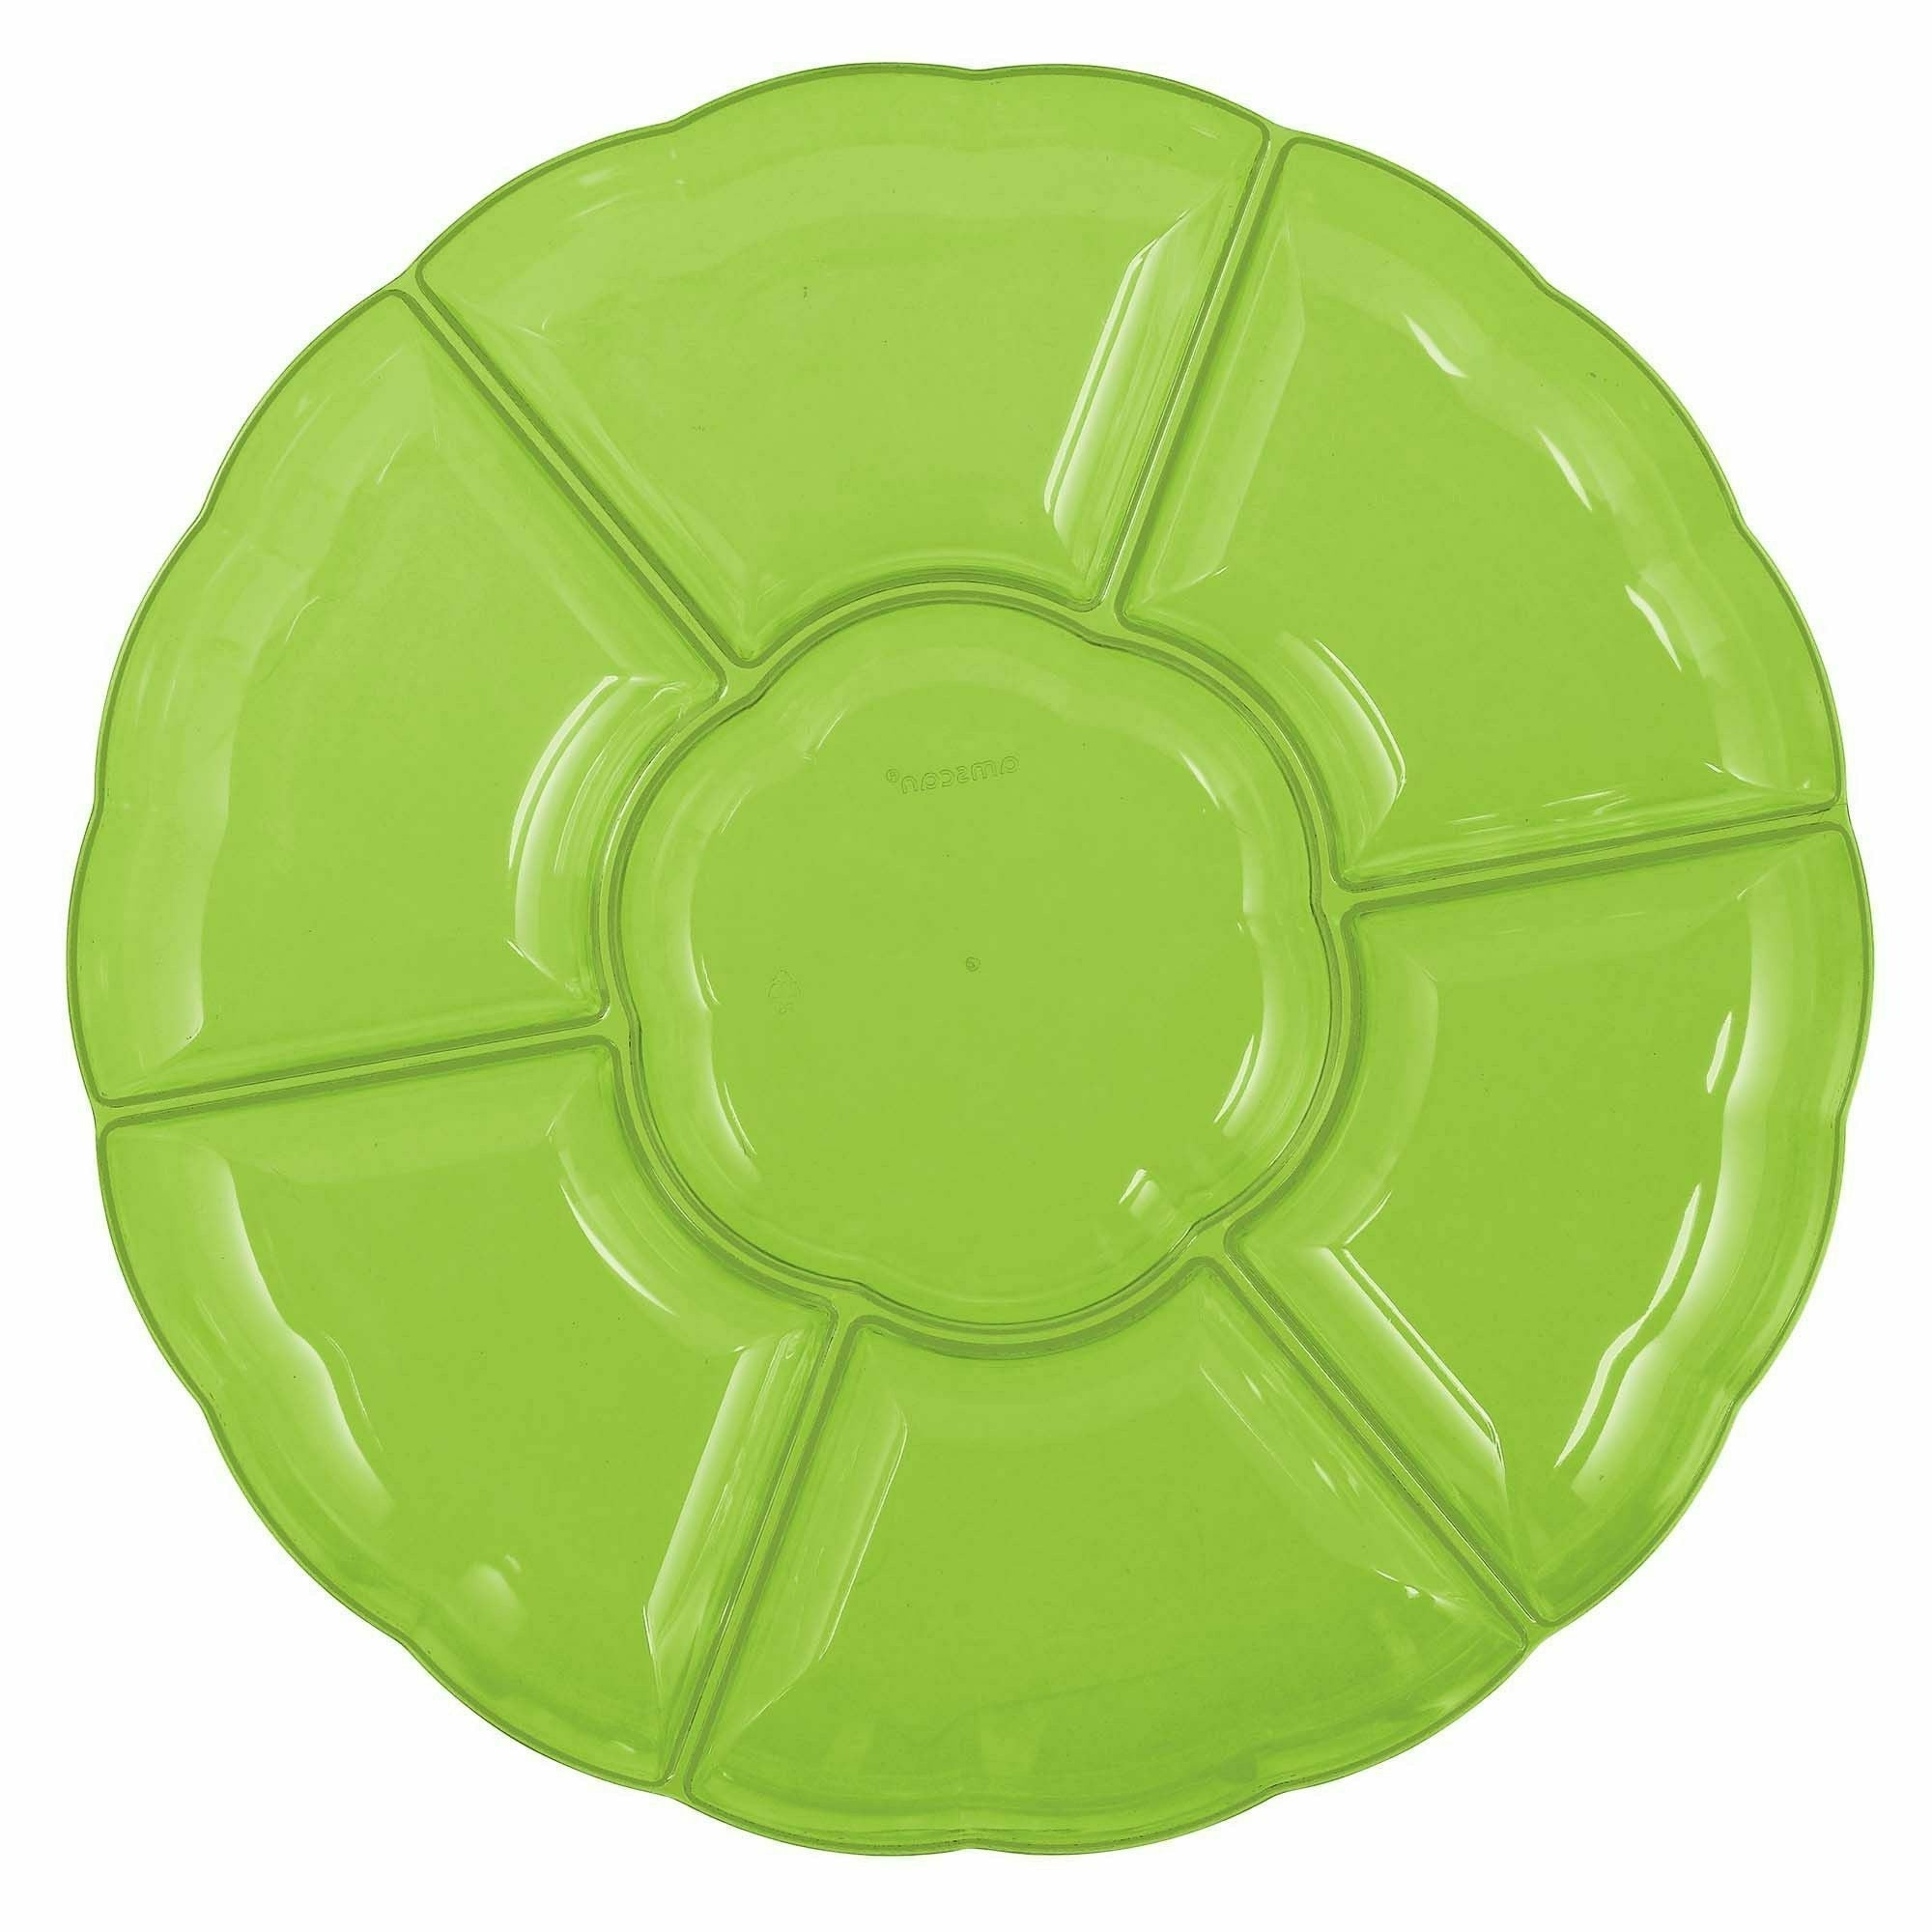 Amscan 16" Compartment Chip & Dip Tray - Kiwi